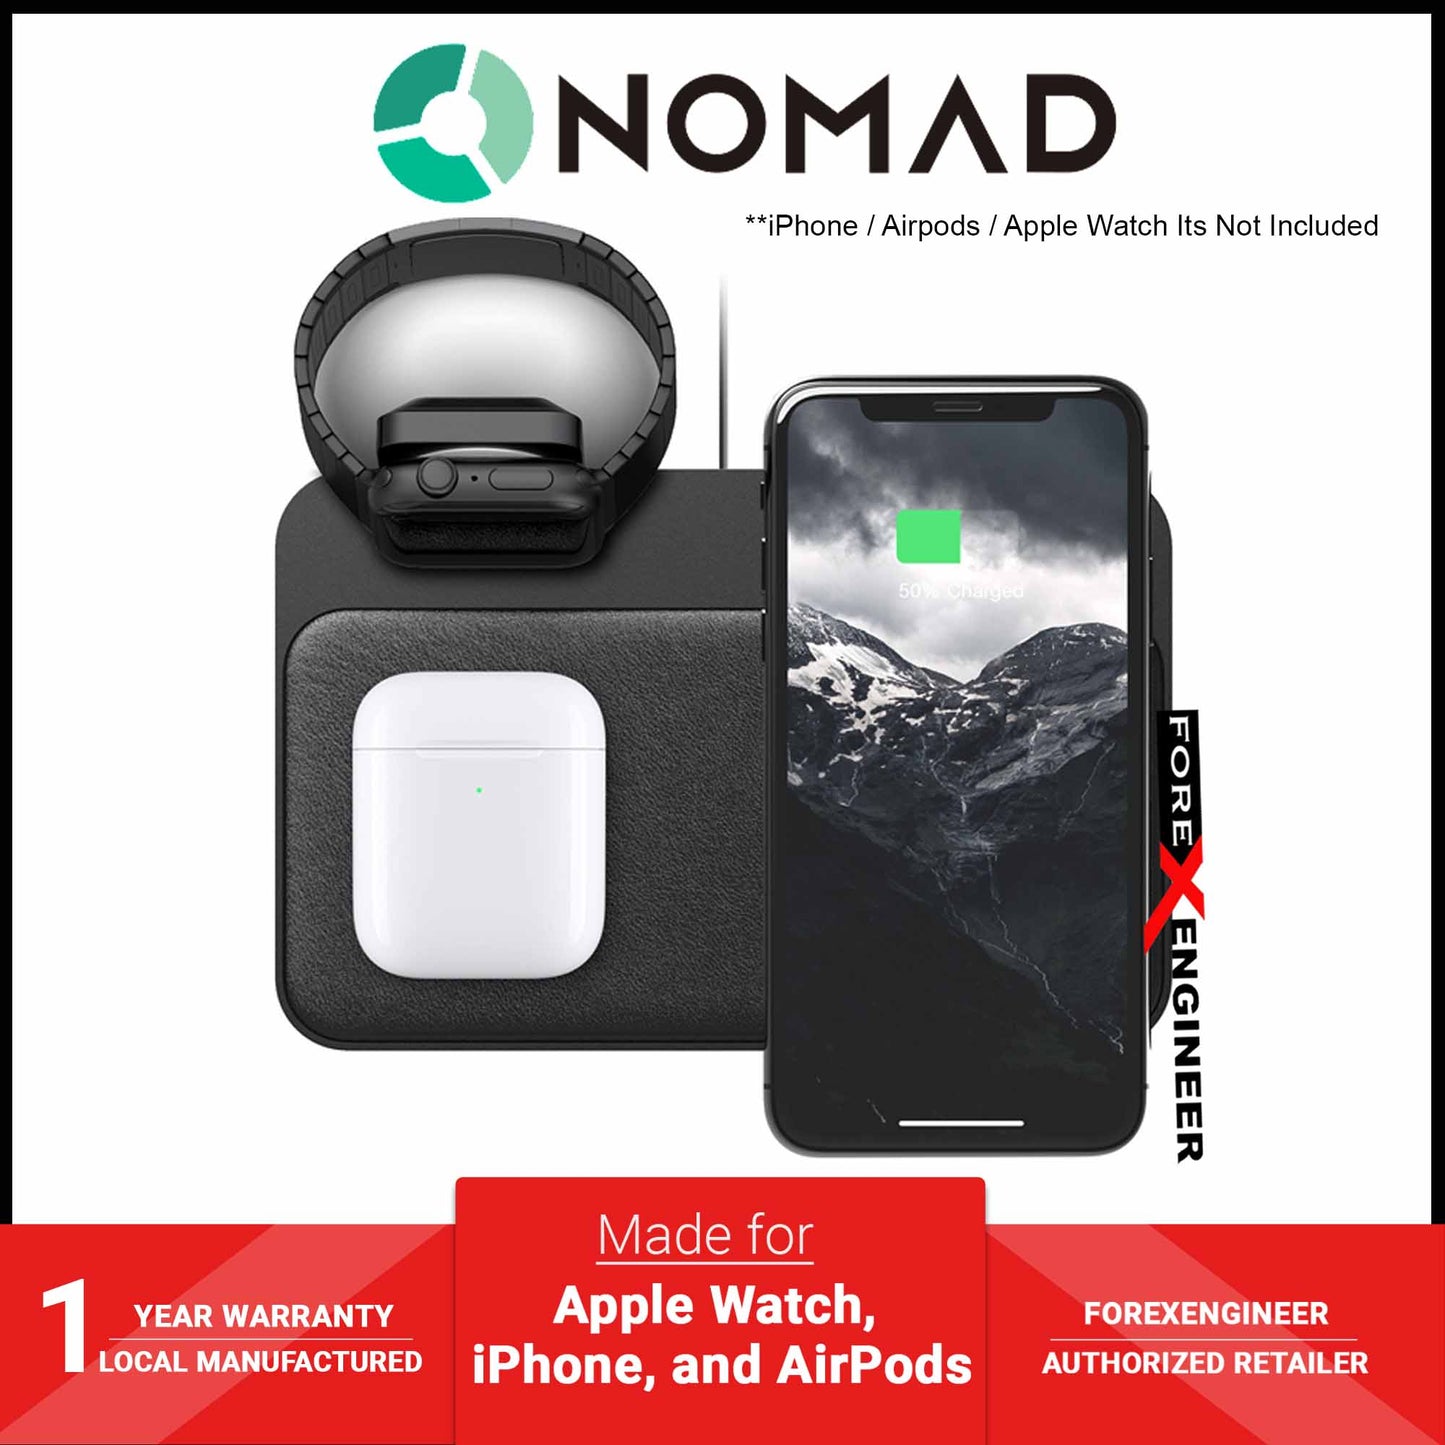 Nomad Base Station Horween Leather Charging Pad Apple Watch Edition Version 2 - Black (Barcode: 856500018256 )